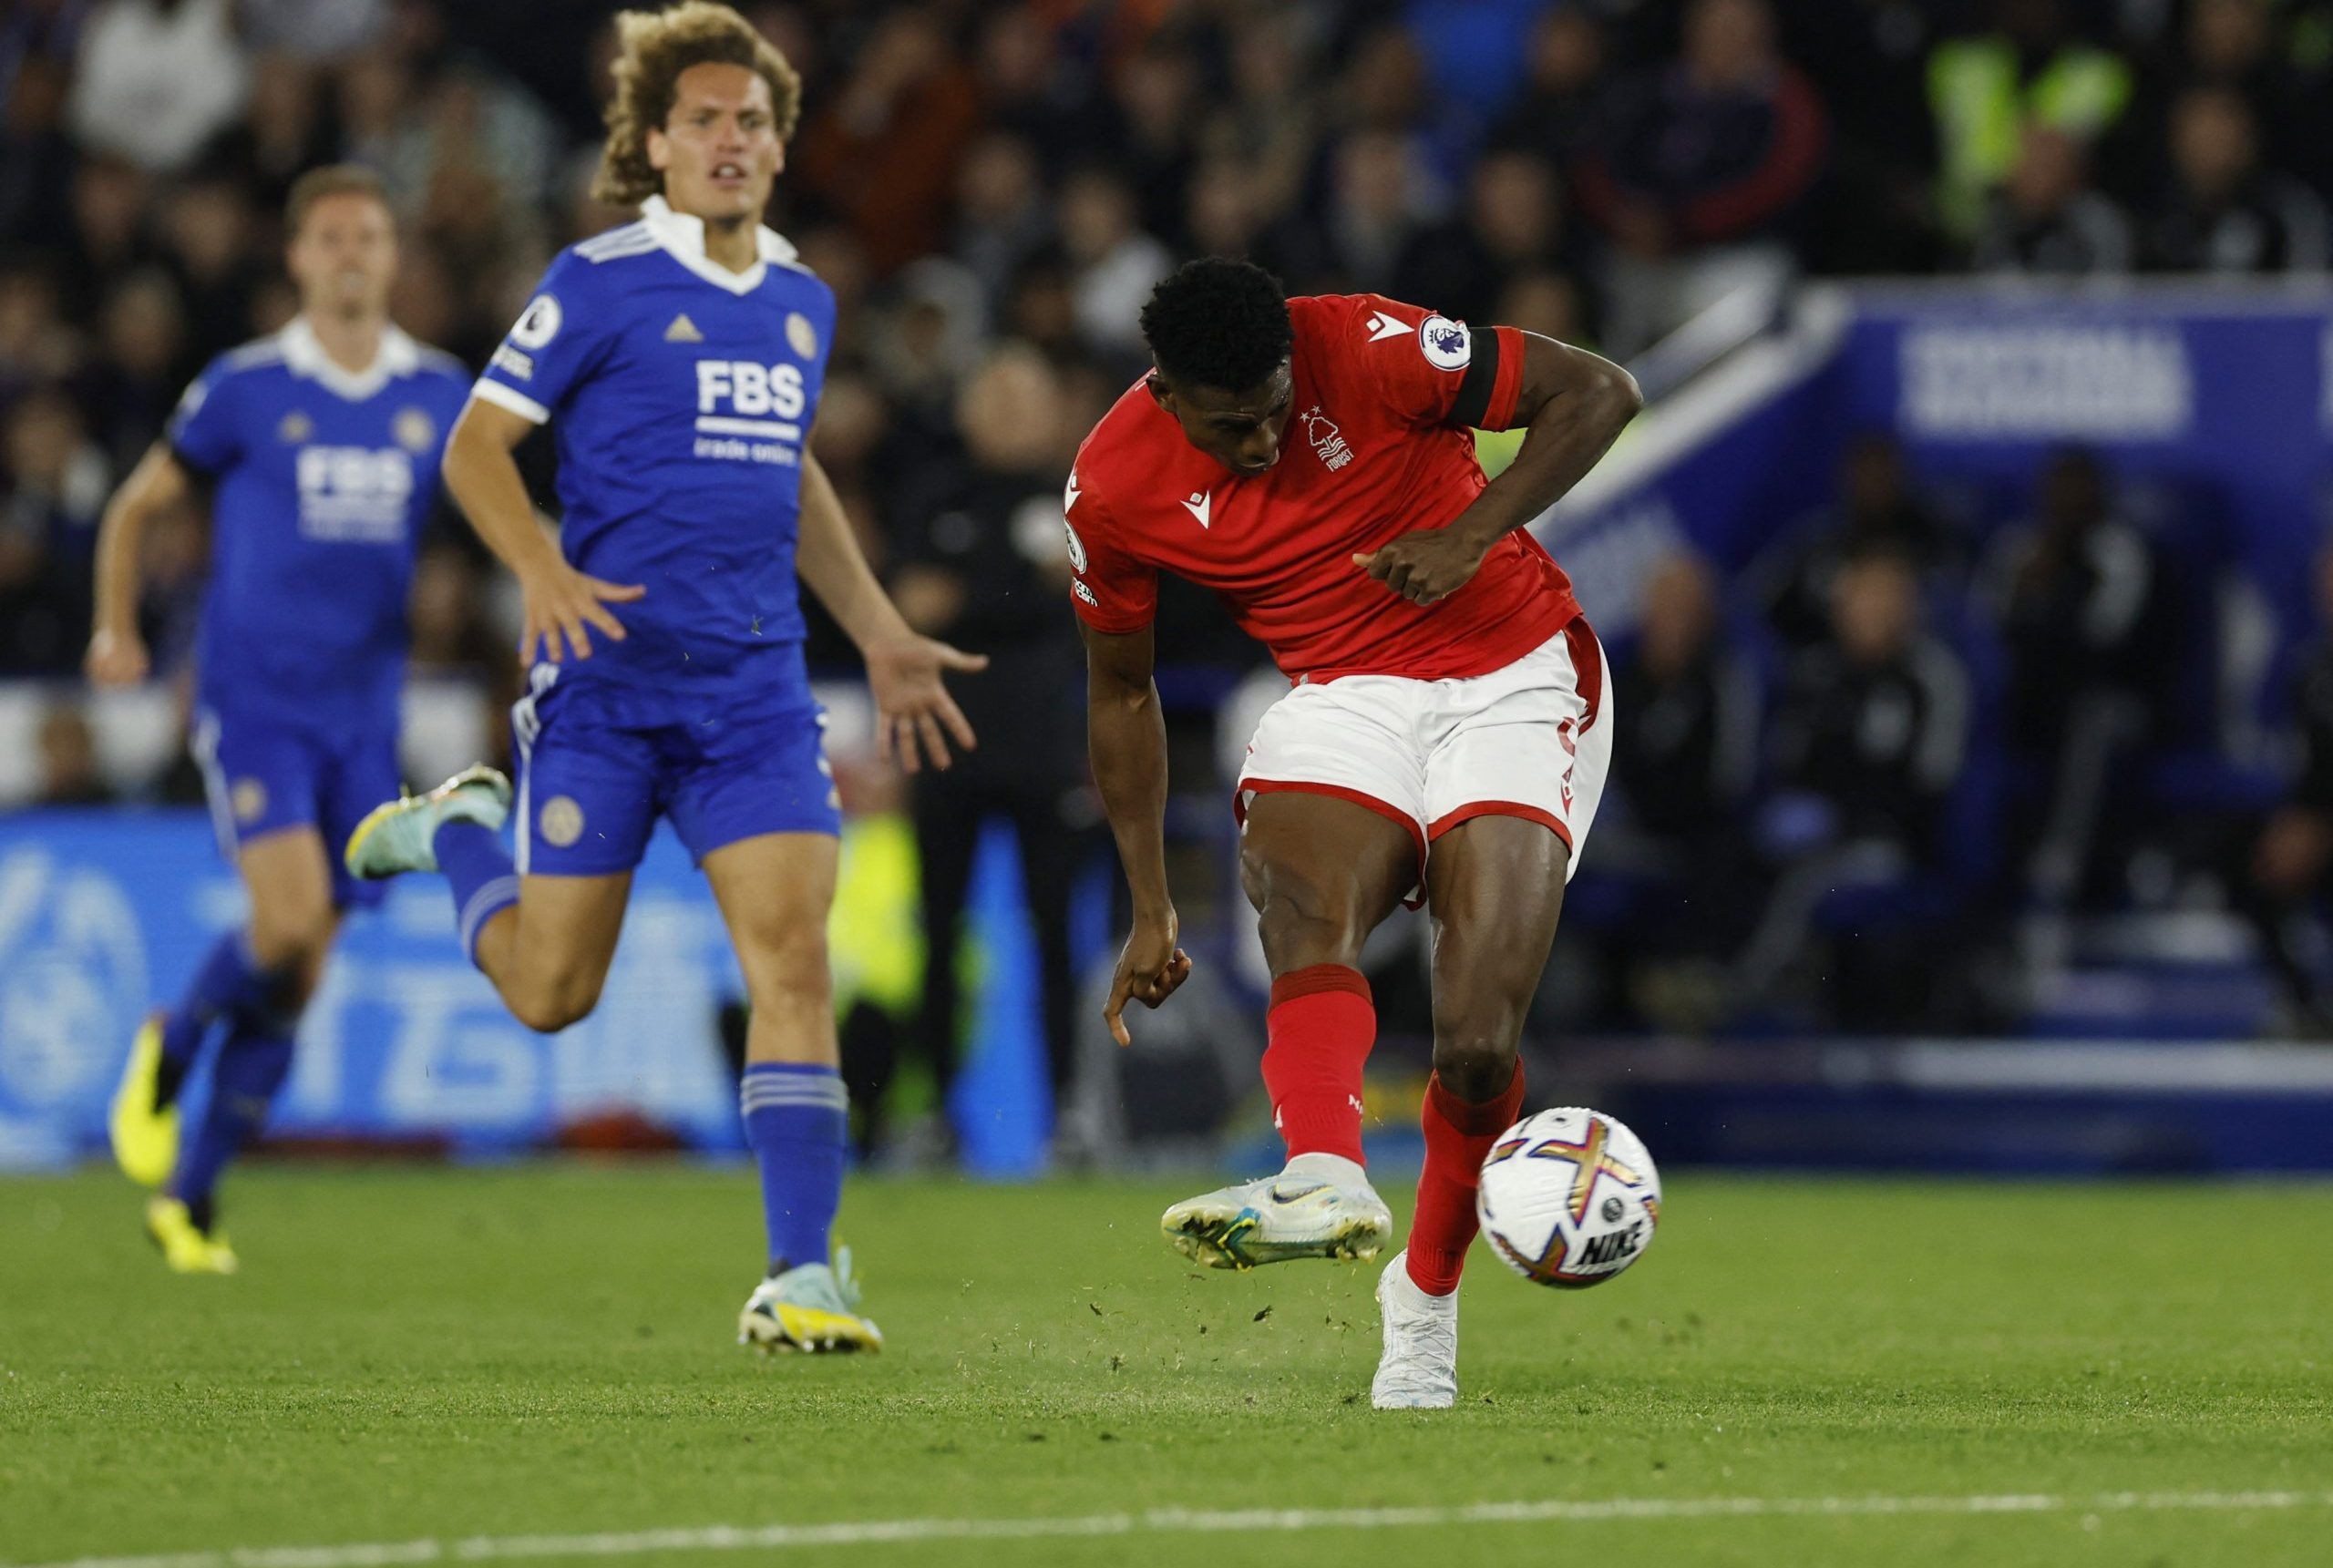 Soccer Football - Premier League - Leicester City v Nottingham Forest - King Power Stadium, Leicester, Britain - October 3, 2022 Nottingham Forest's Taiwo Awoniyi shoots at goal Action Images via Reuters/Jason Cairnduff EDITORIAL USE ONLY. No use with unauthorized audio, video, data, fixture lists, club/league logos or 'live' services. Online in-match use limited to 75 images, no video emulation. No use in betting, games or single club /league/player publications.  Please contact your account re